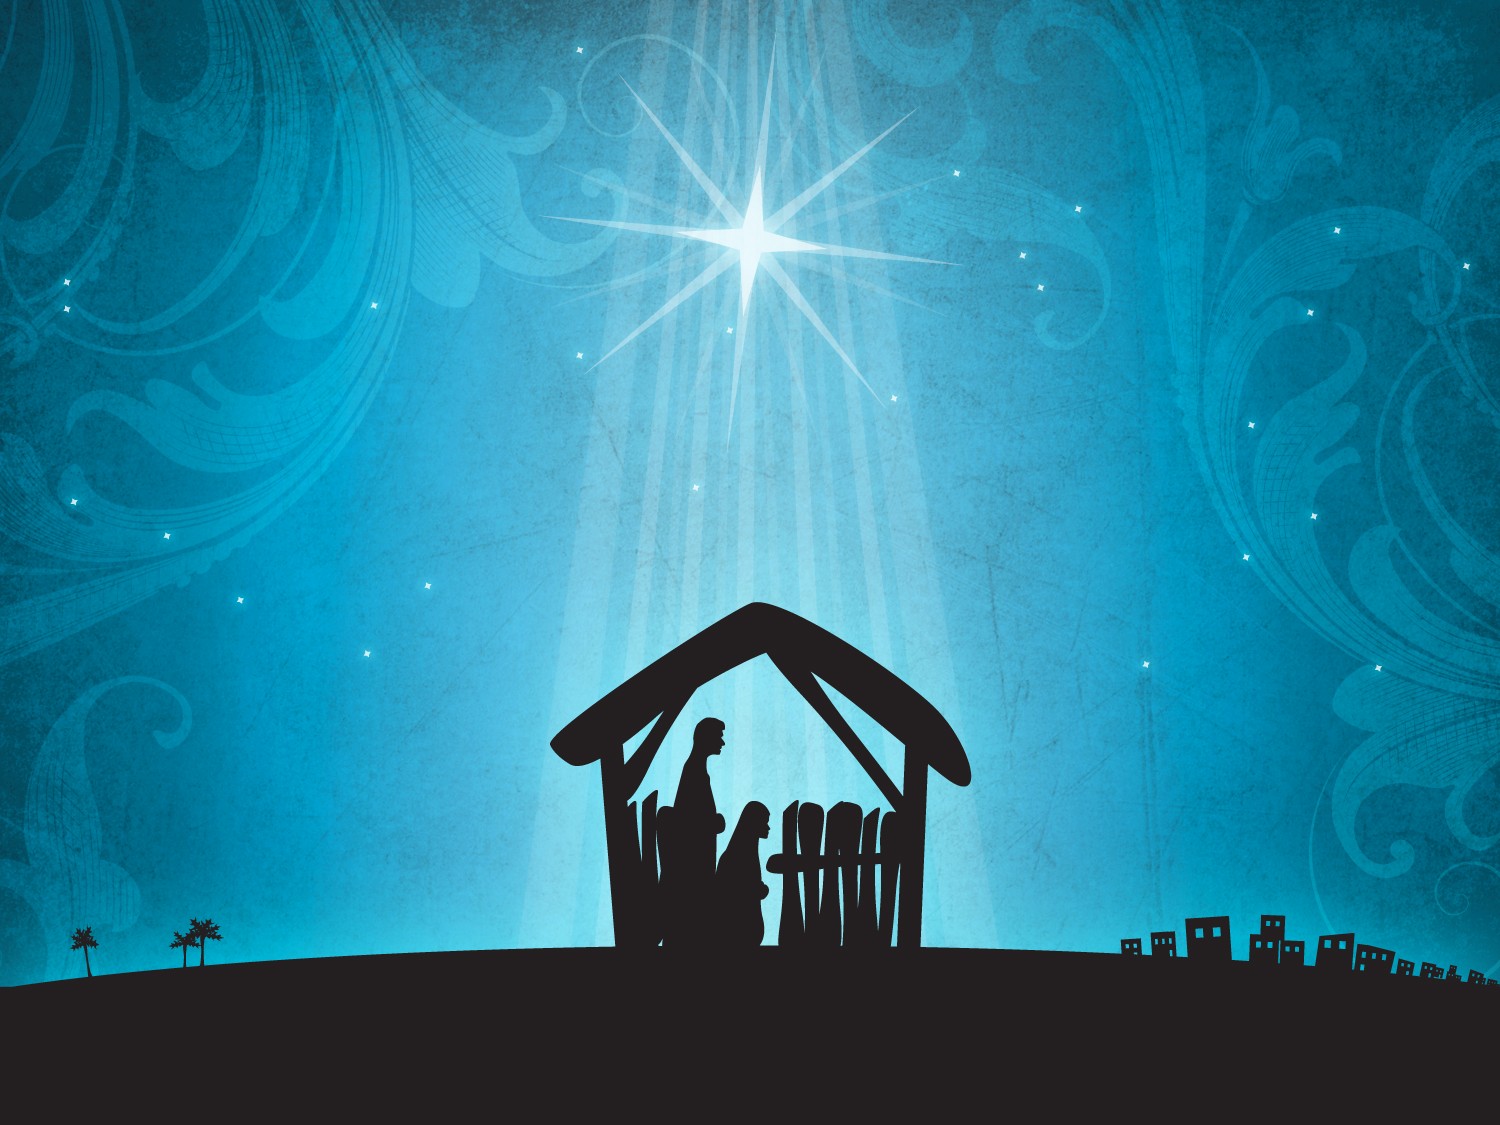 Merry Christmas Nativity Image Ing Gallery